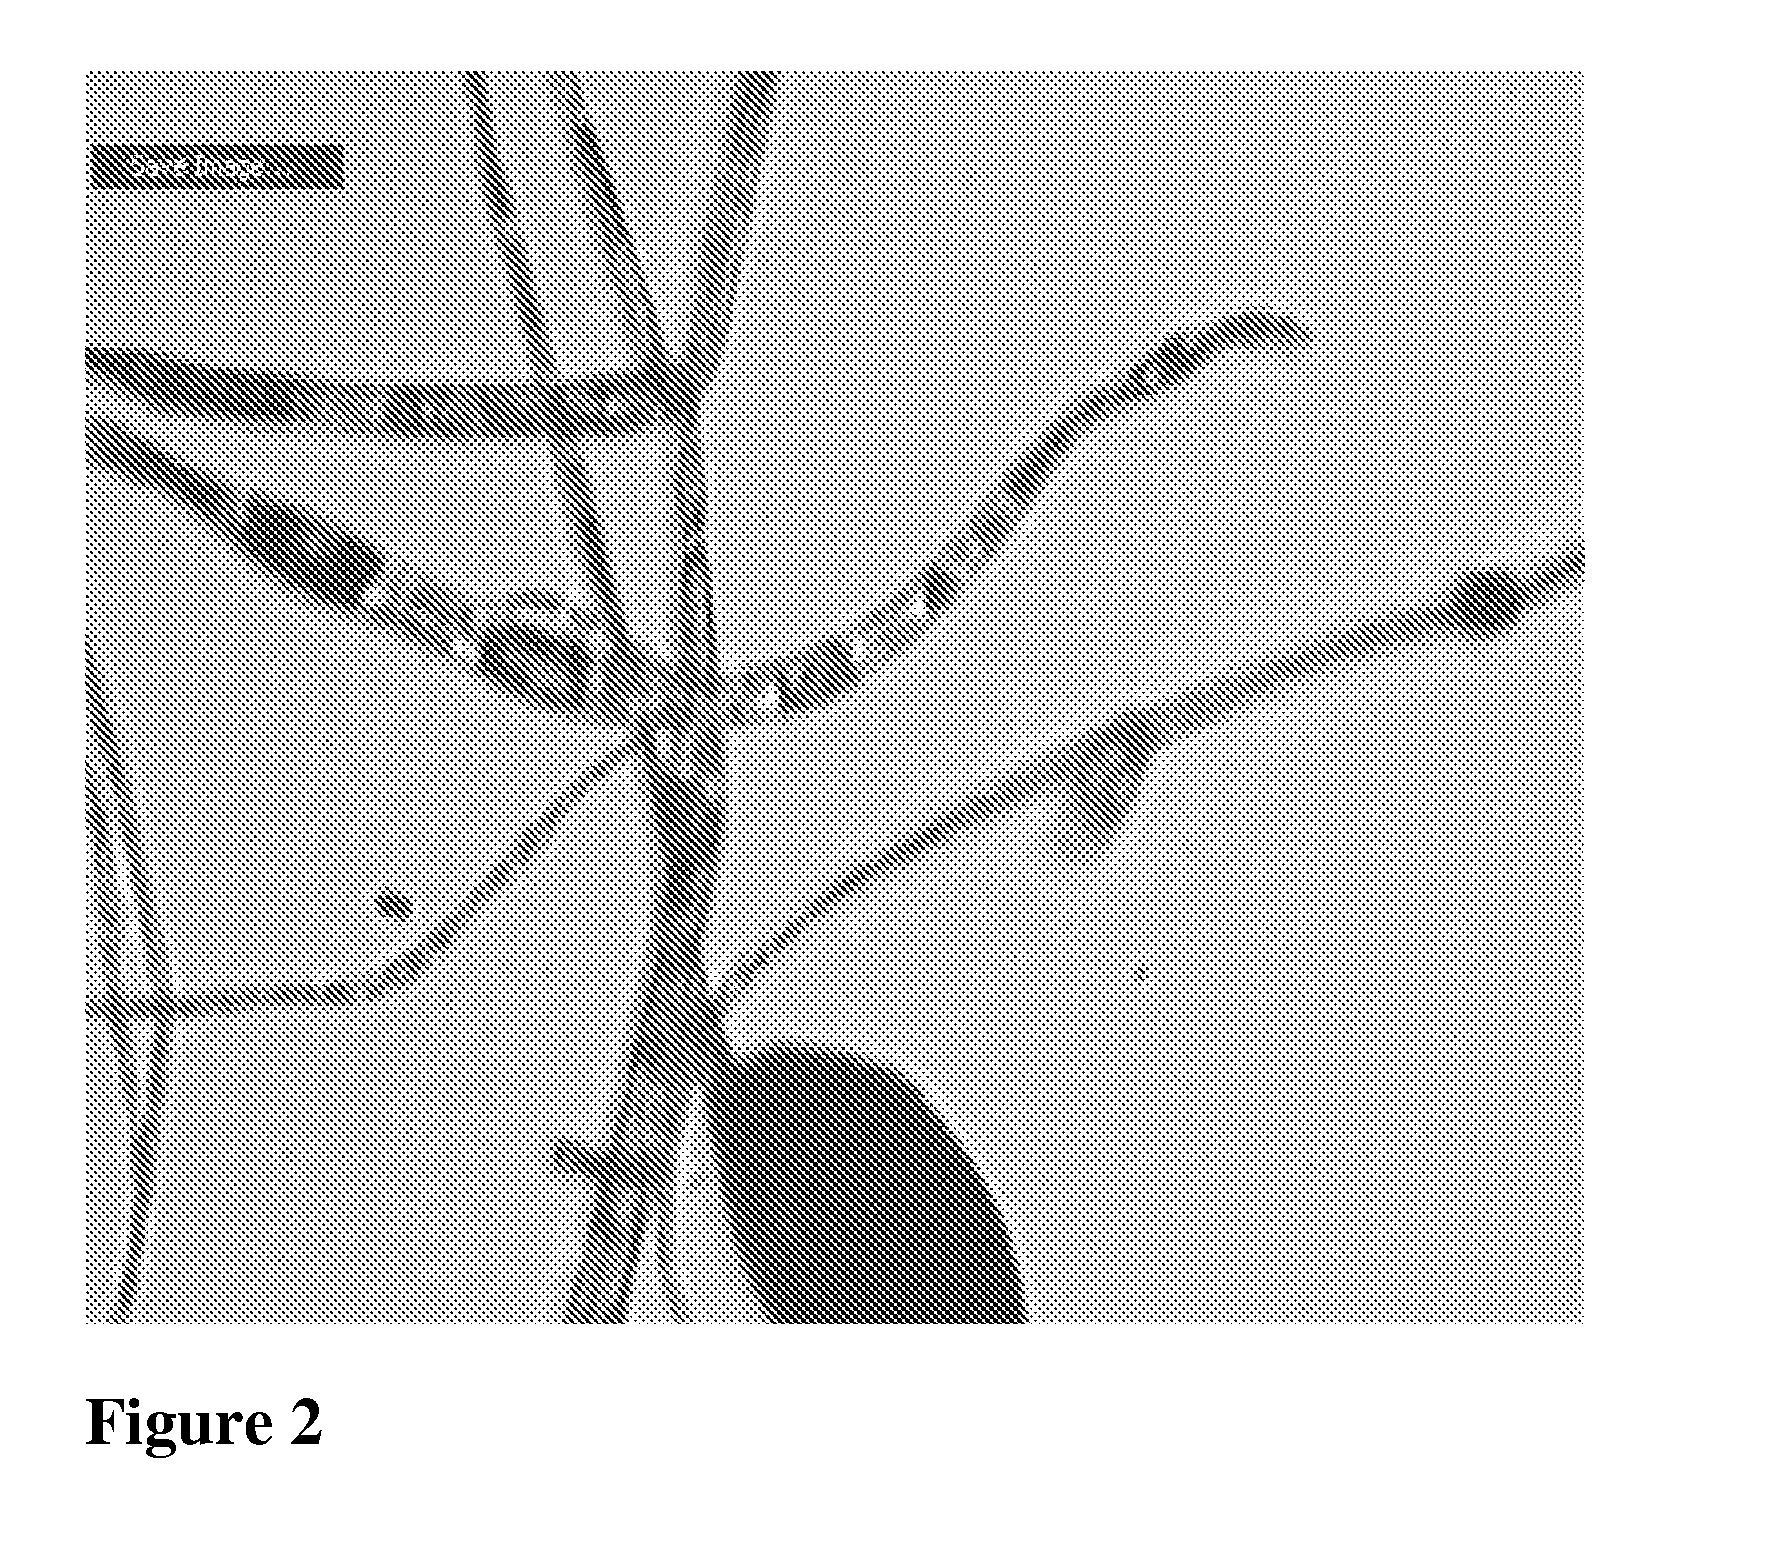 Fibers Including Nanoparticles And A Method Of Producing The Nanoparticles